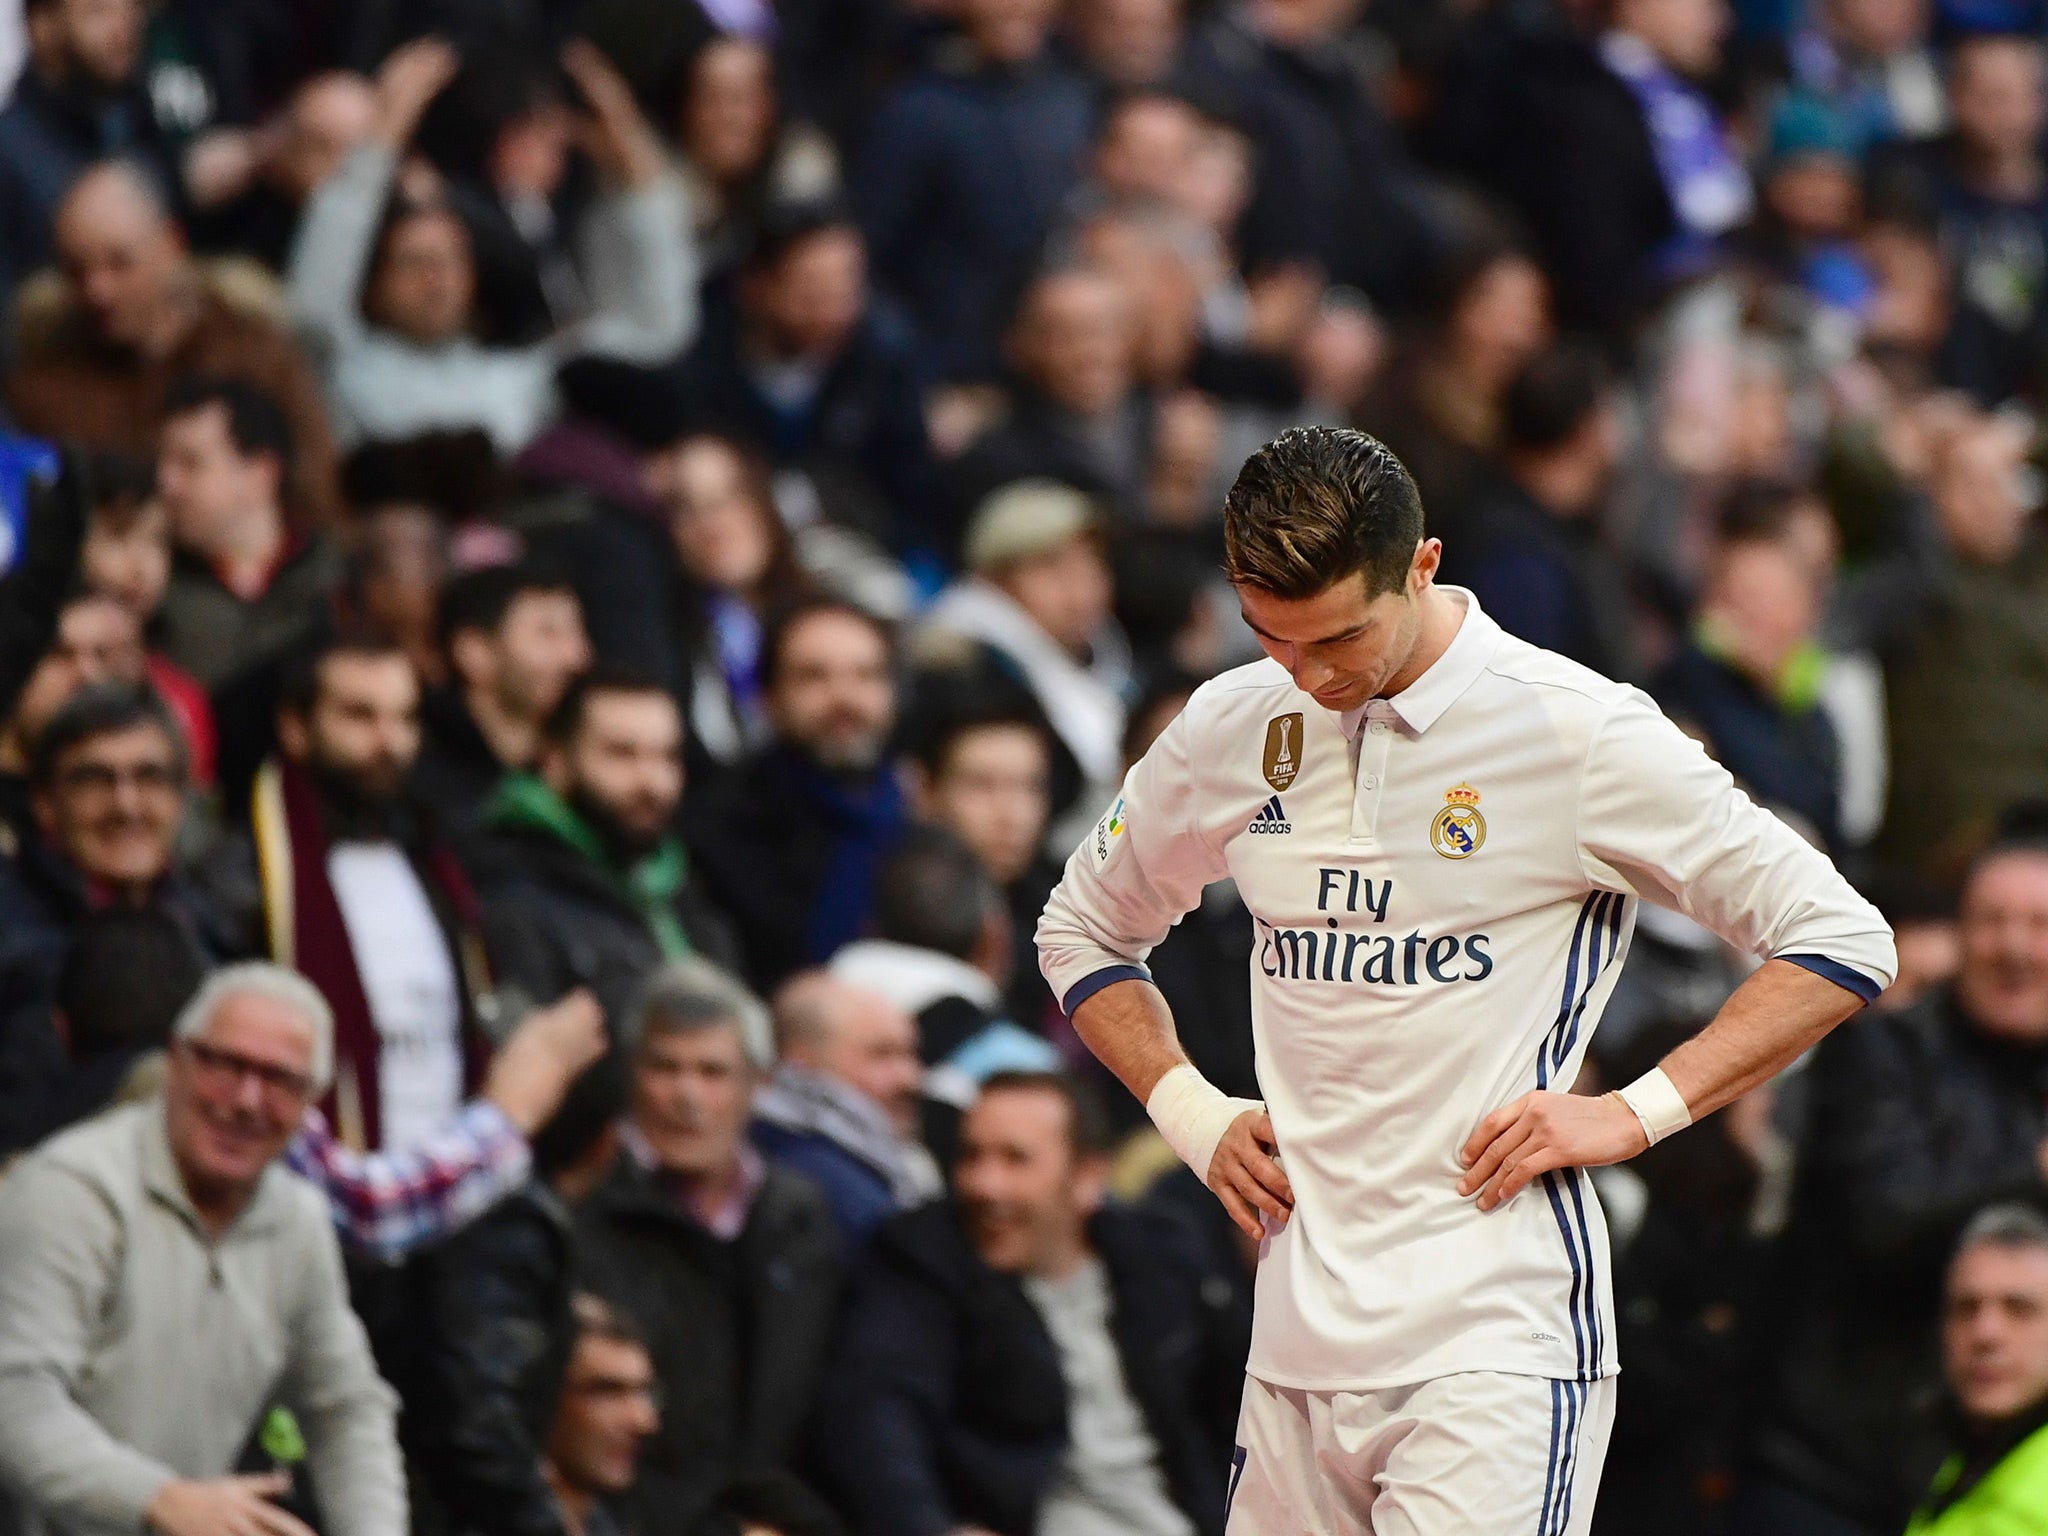 Cristiano Ronaldo responded to the jeers by scoring once and registering an assist against Real Sociedad